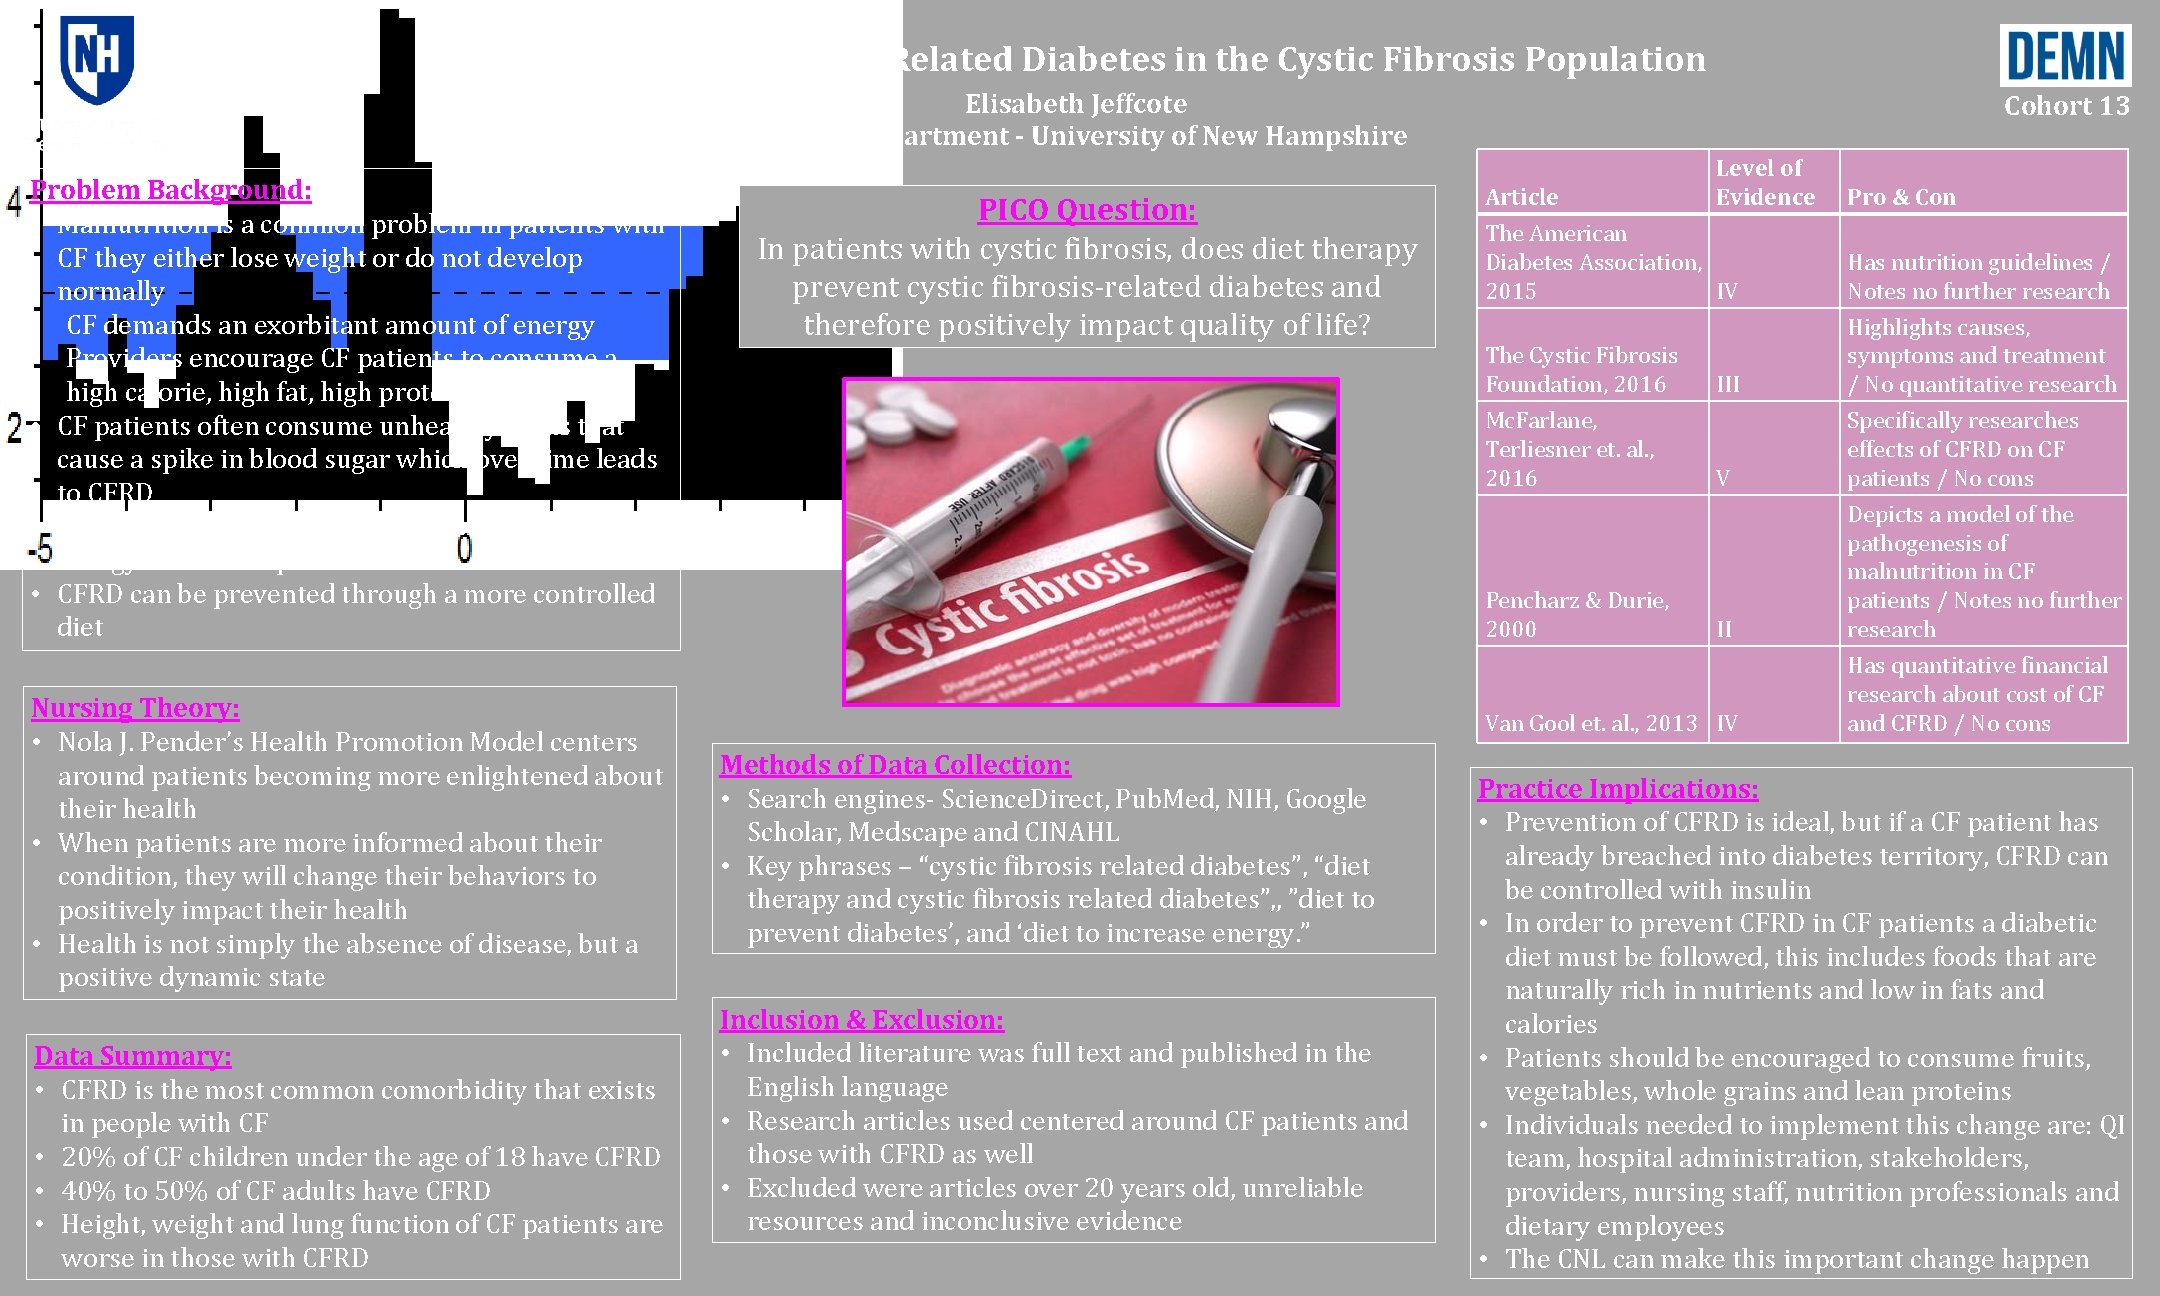 Preventing Cystic Fibrosis-Related Diabetes in the Cystic Fibrosis Population Elisabeth Jeffcote Nursing Department -